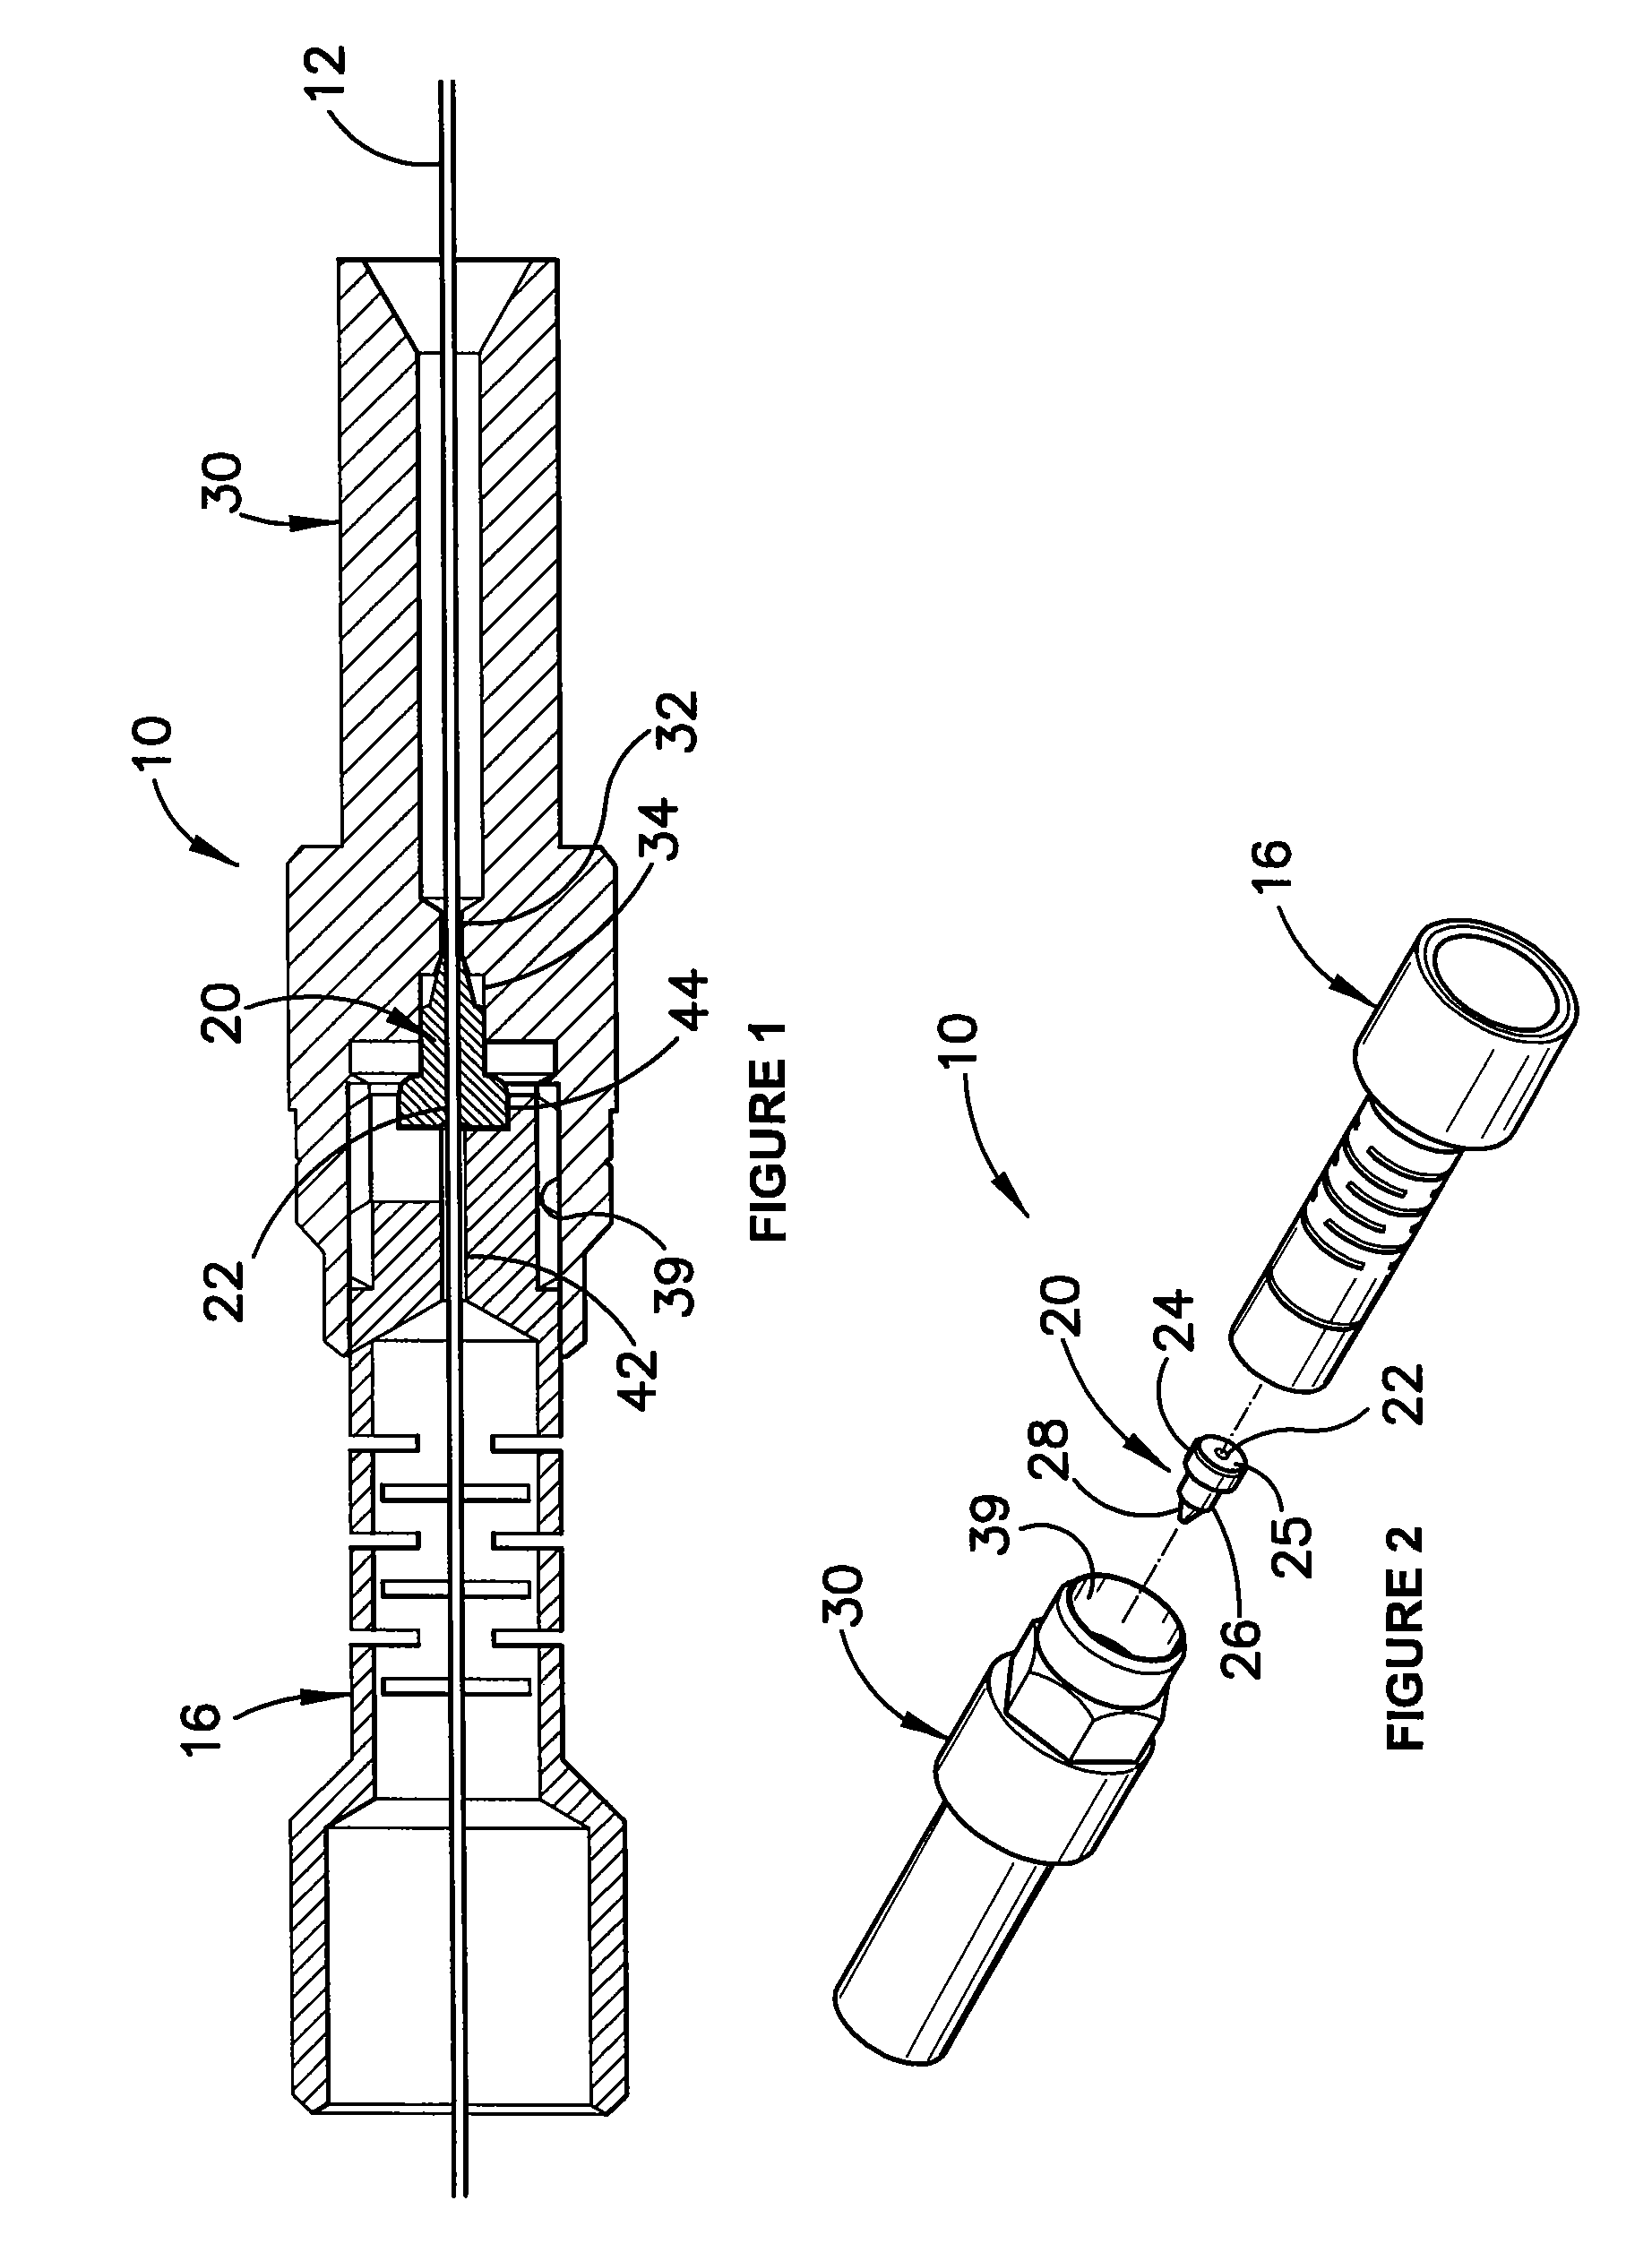 Ferrule for making fingertight column connections in gas chromatography